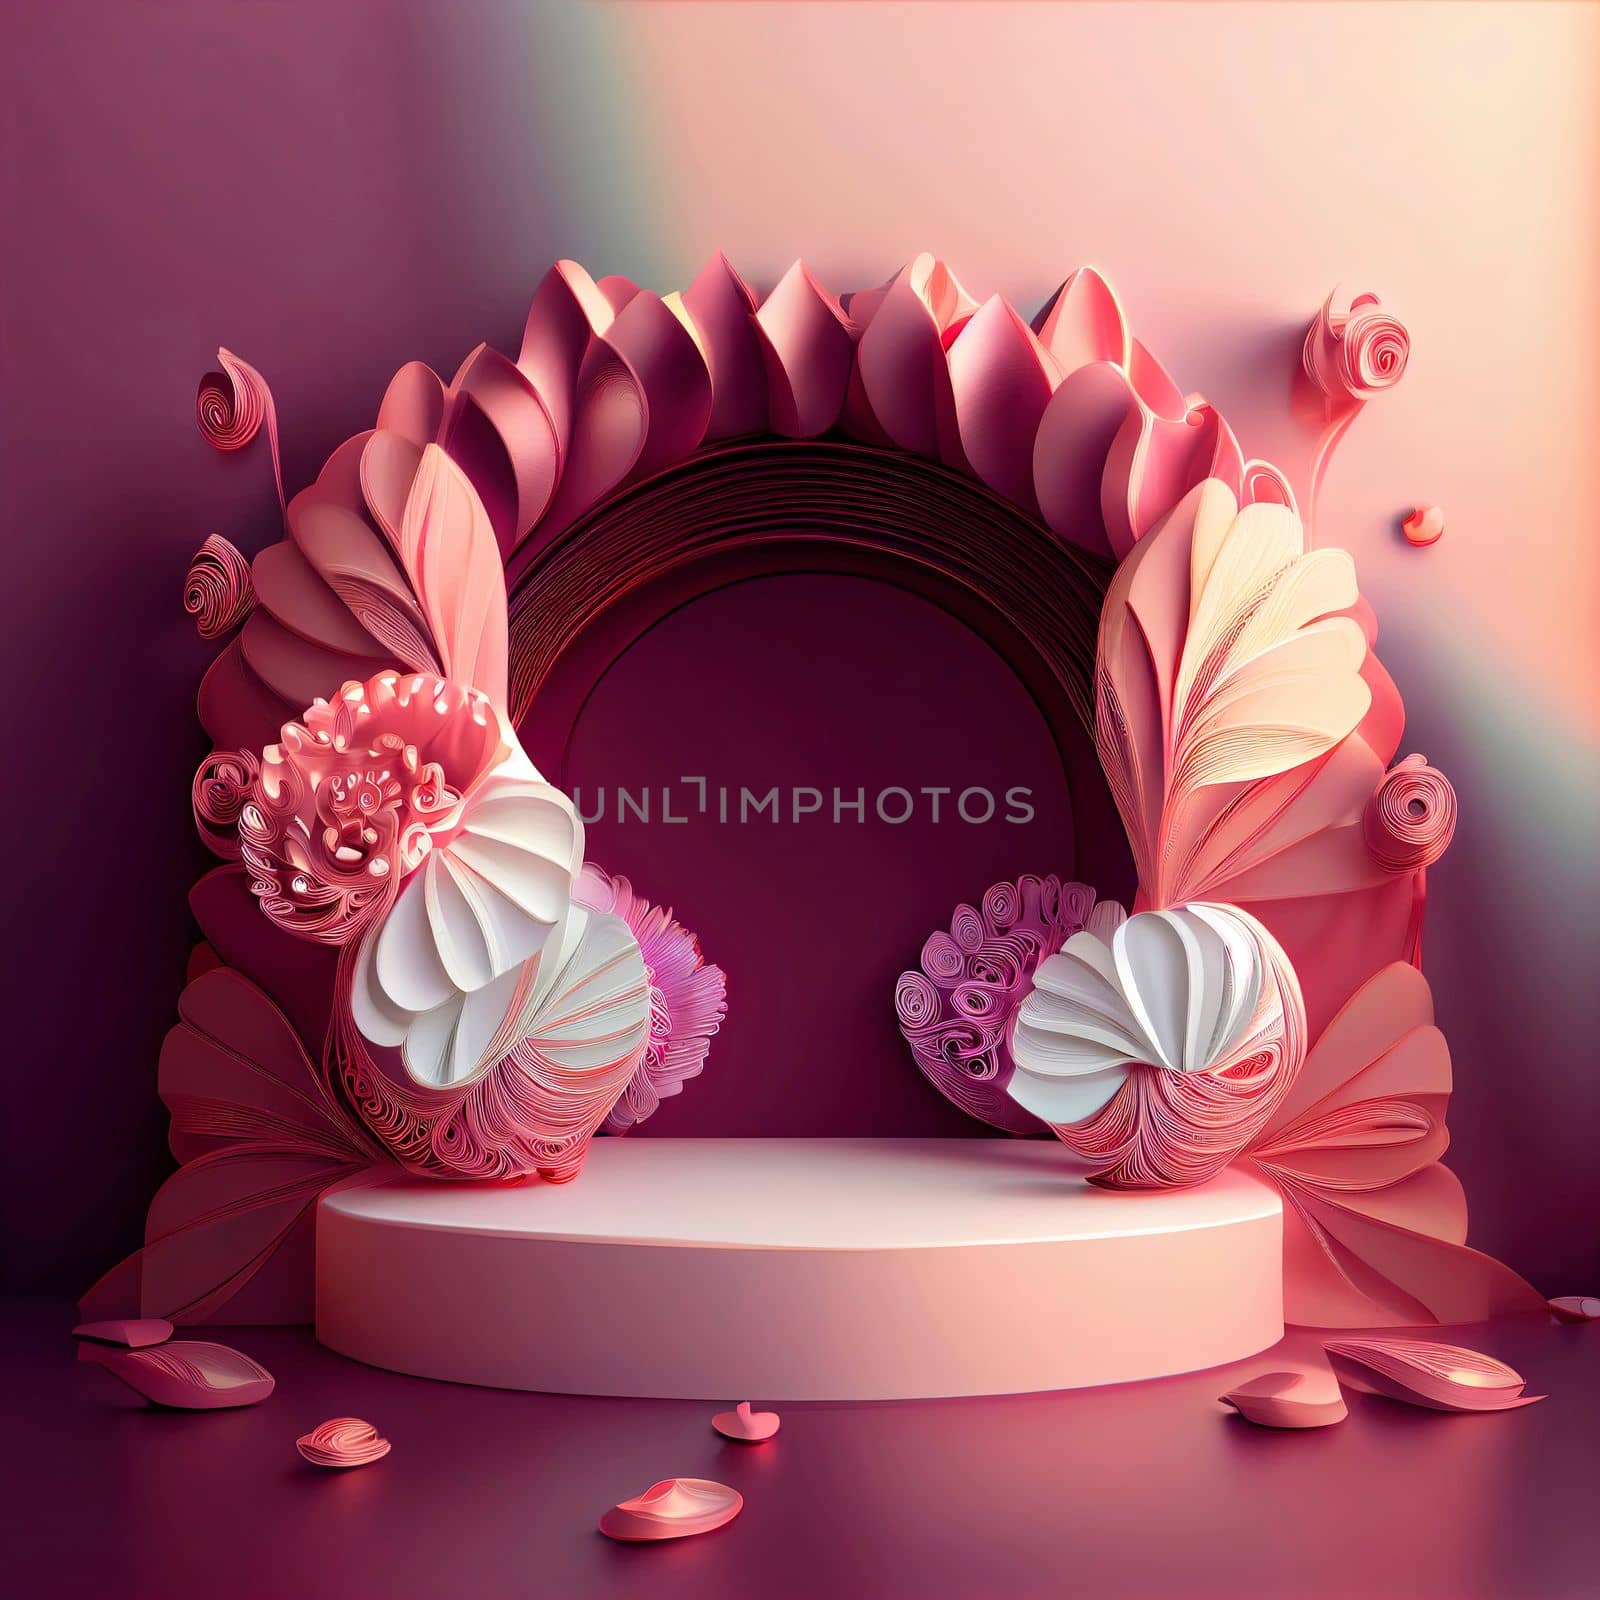 3d illustration of podium for display product with flowers by templator